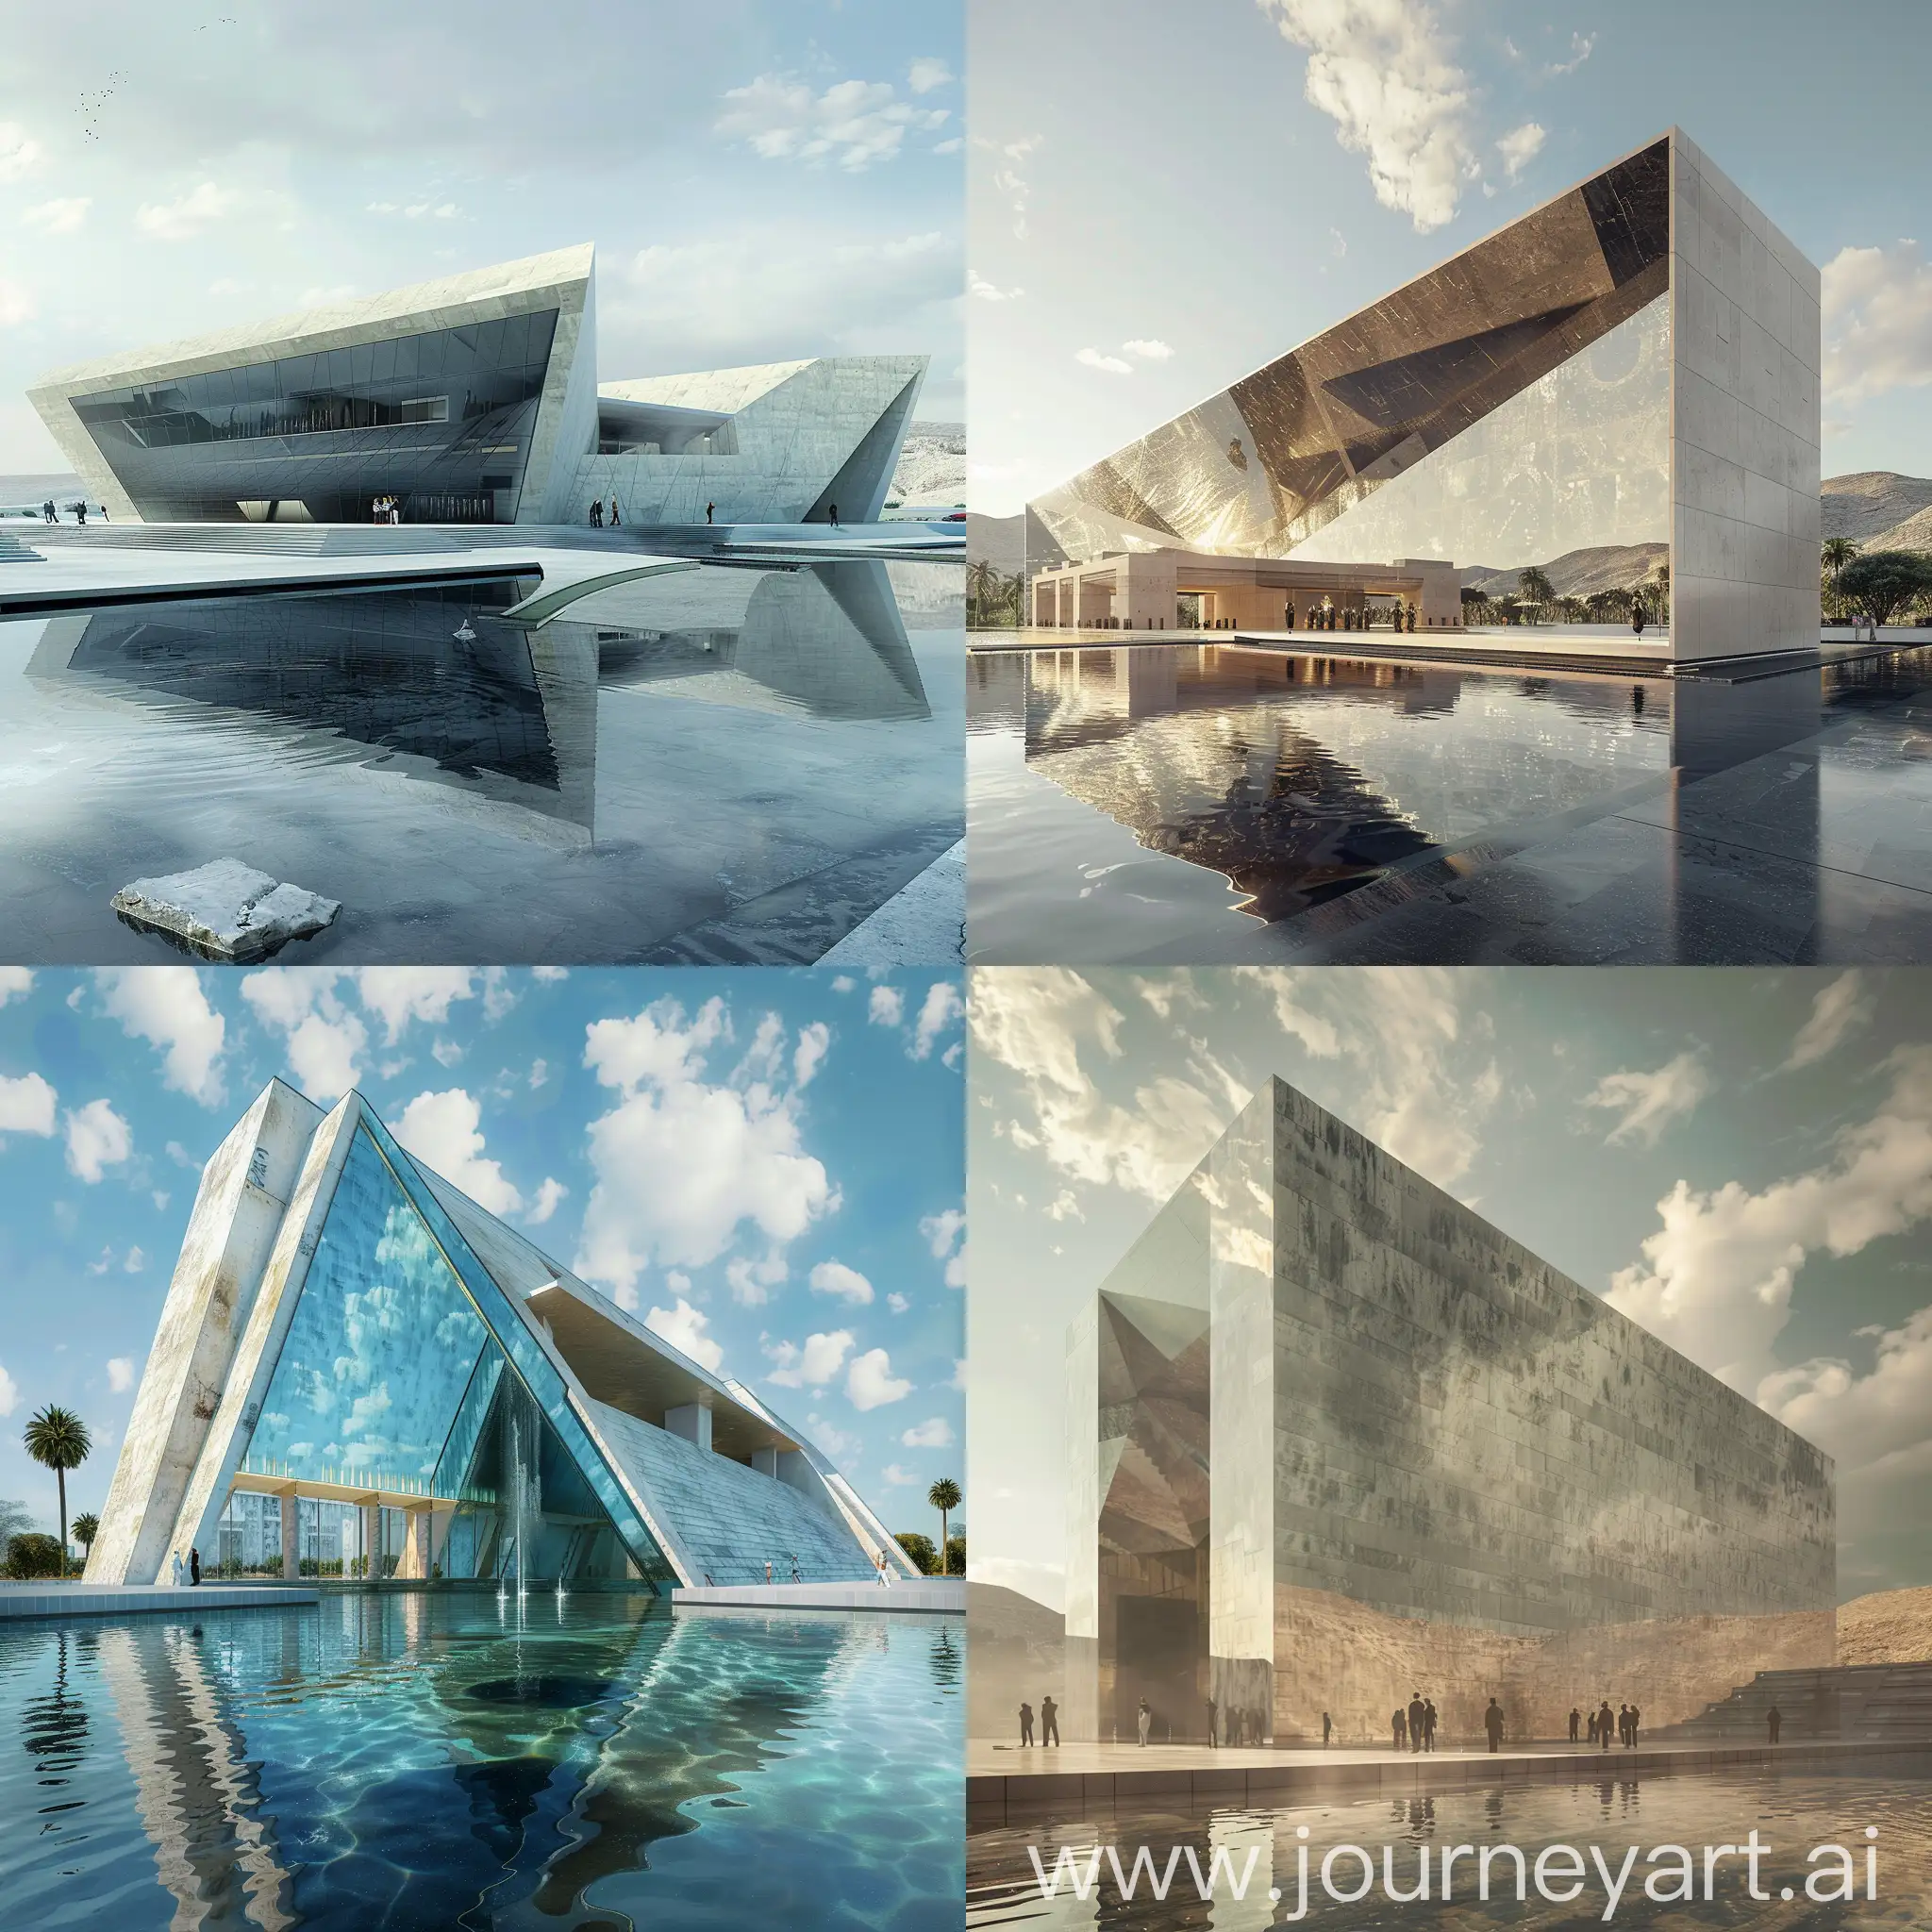 Monumental-TeotihuacanInspired-Hybrid-Building-with-Grand-Water-Mirror